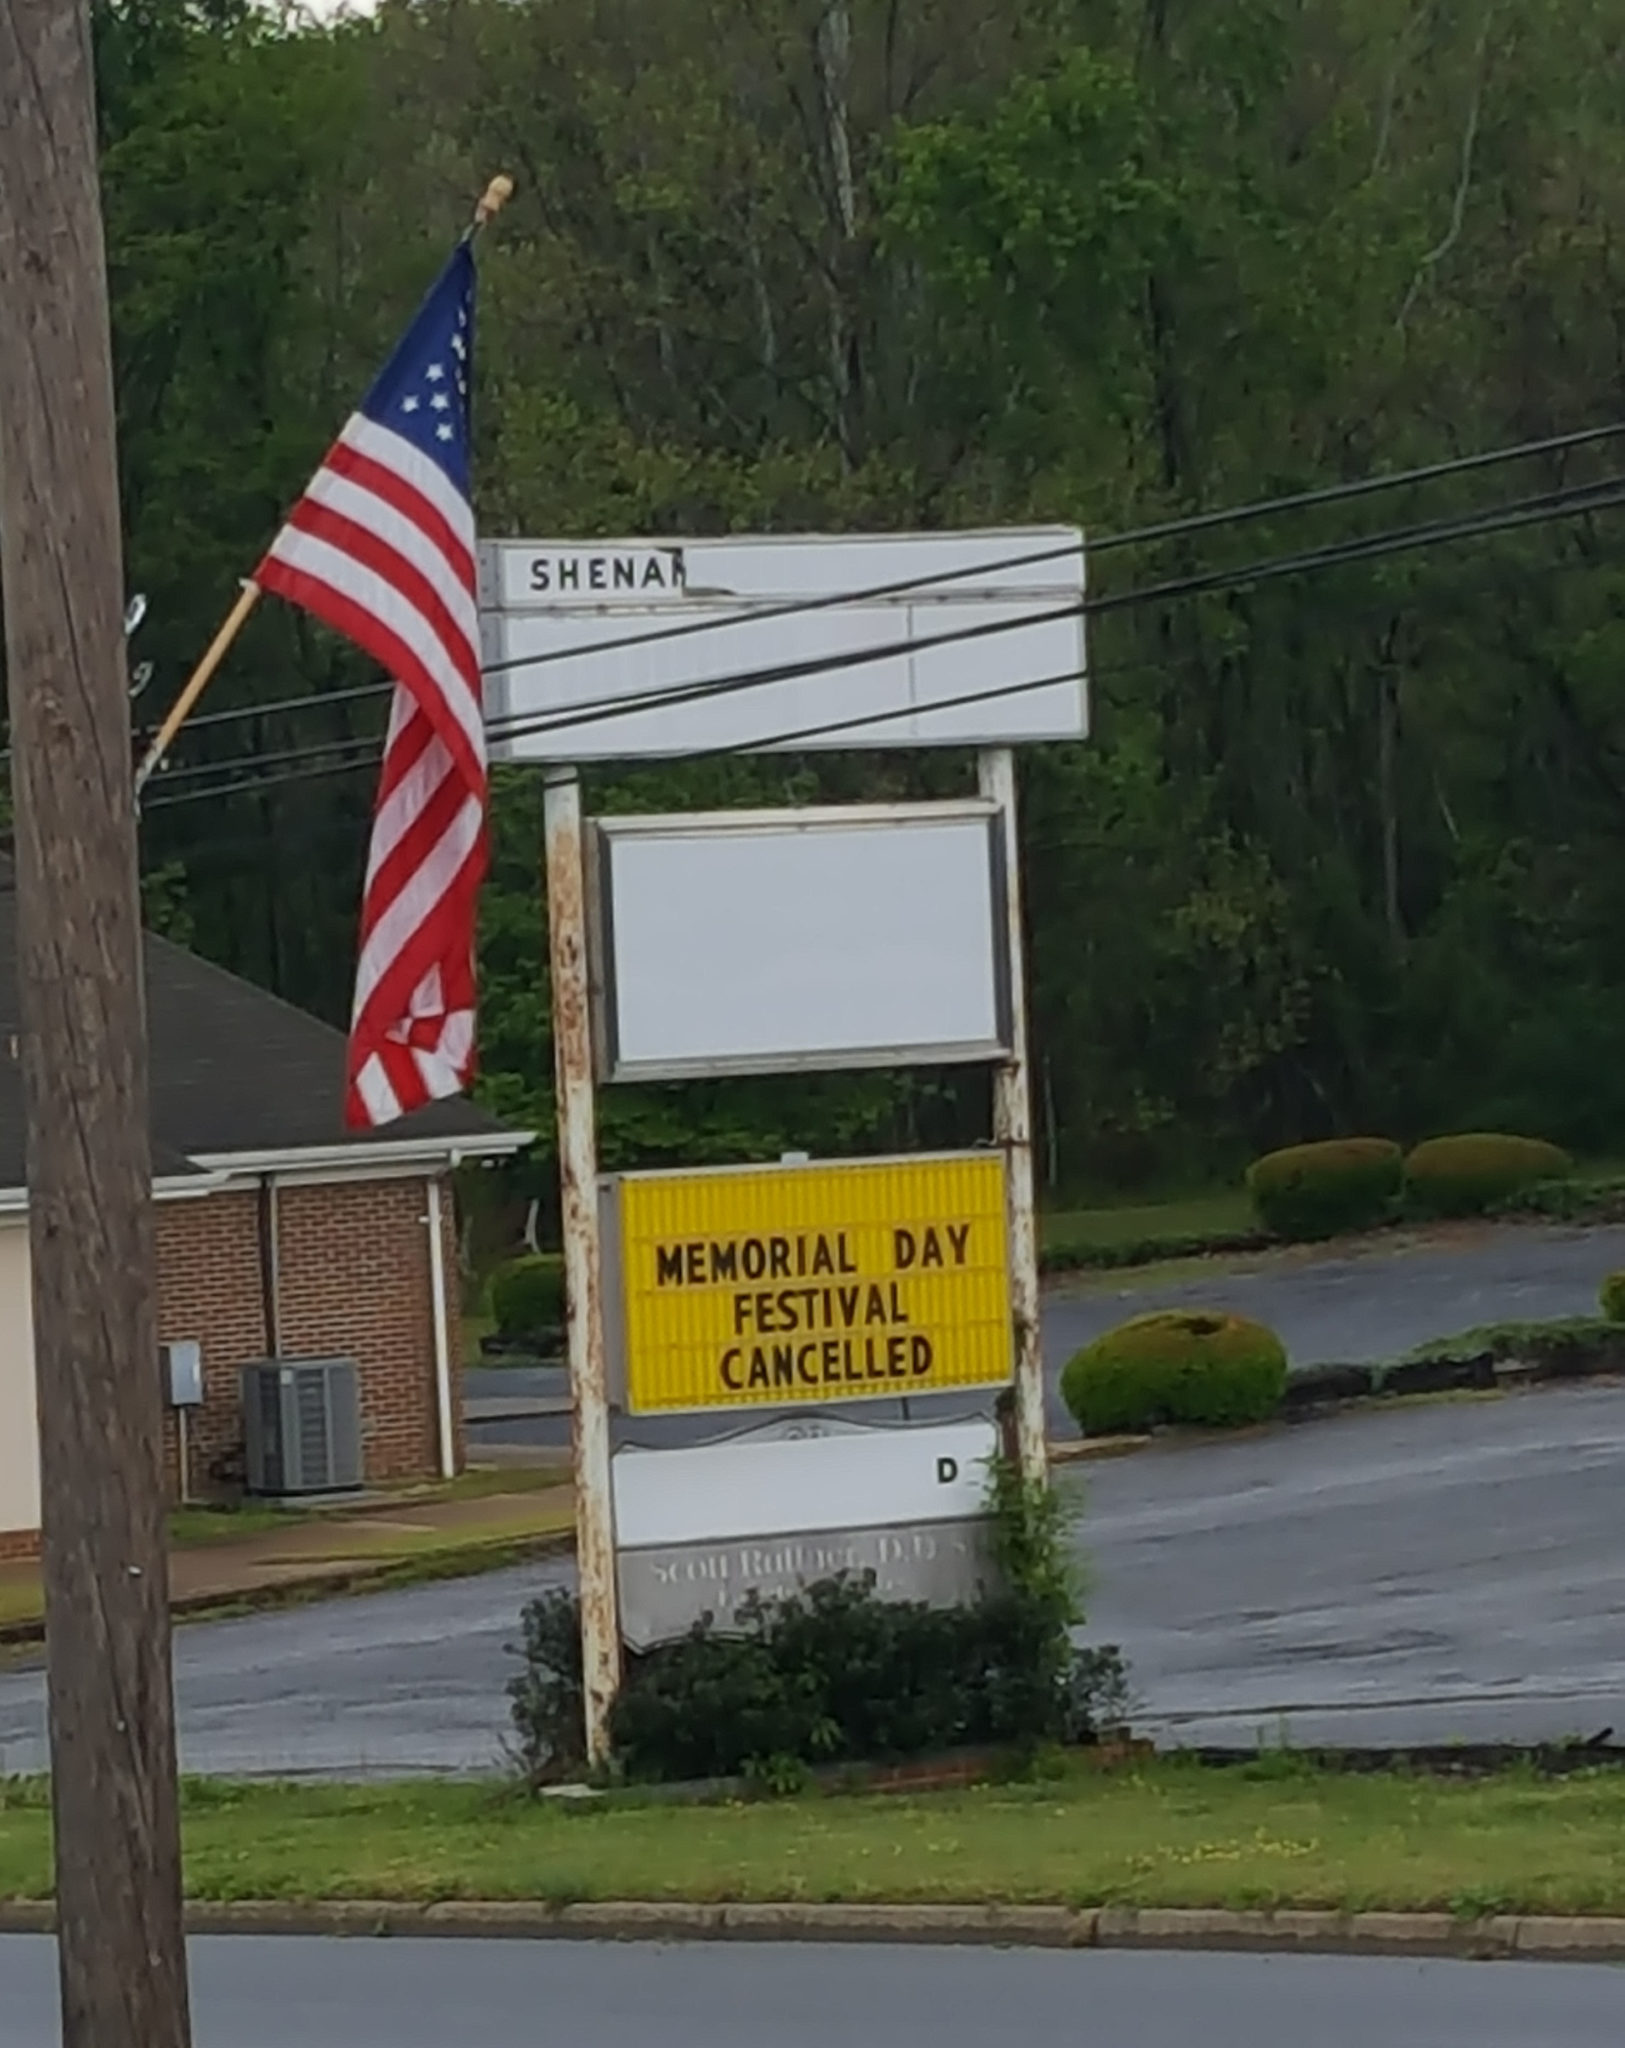 Memorial Day fextival is canceled, but our attitude can still be positive